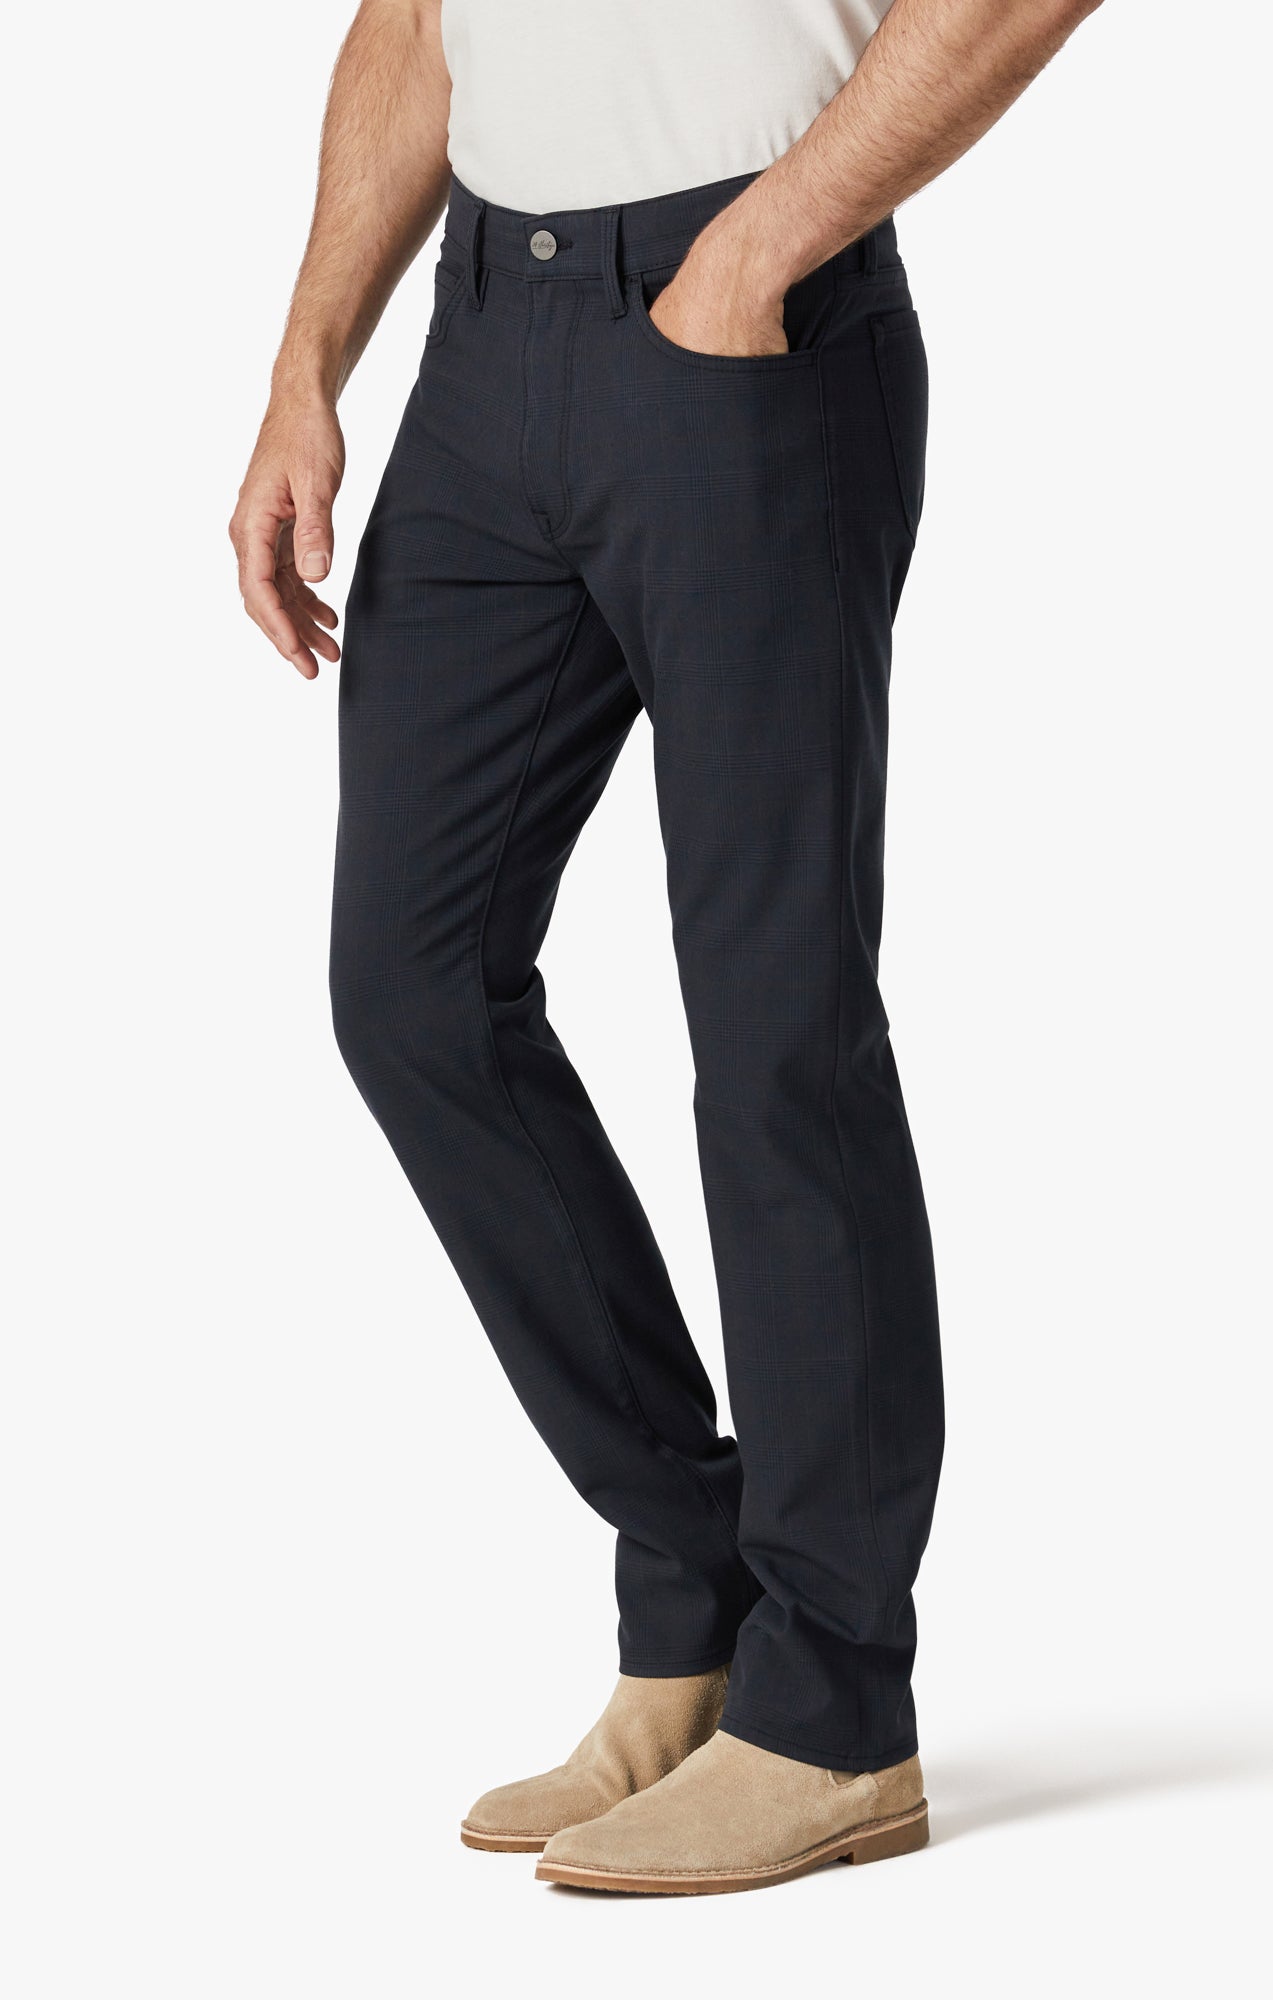 Cool Tapered Leg Pants In Navy Elite Check Image 3